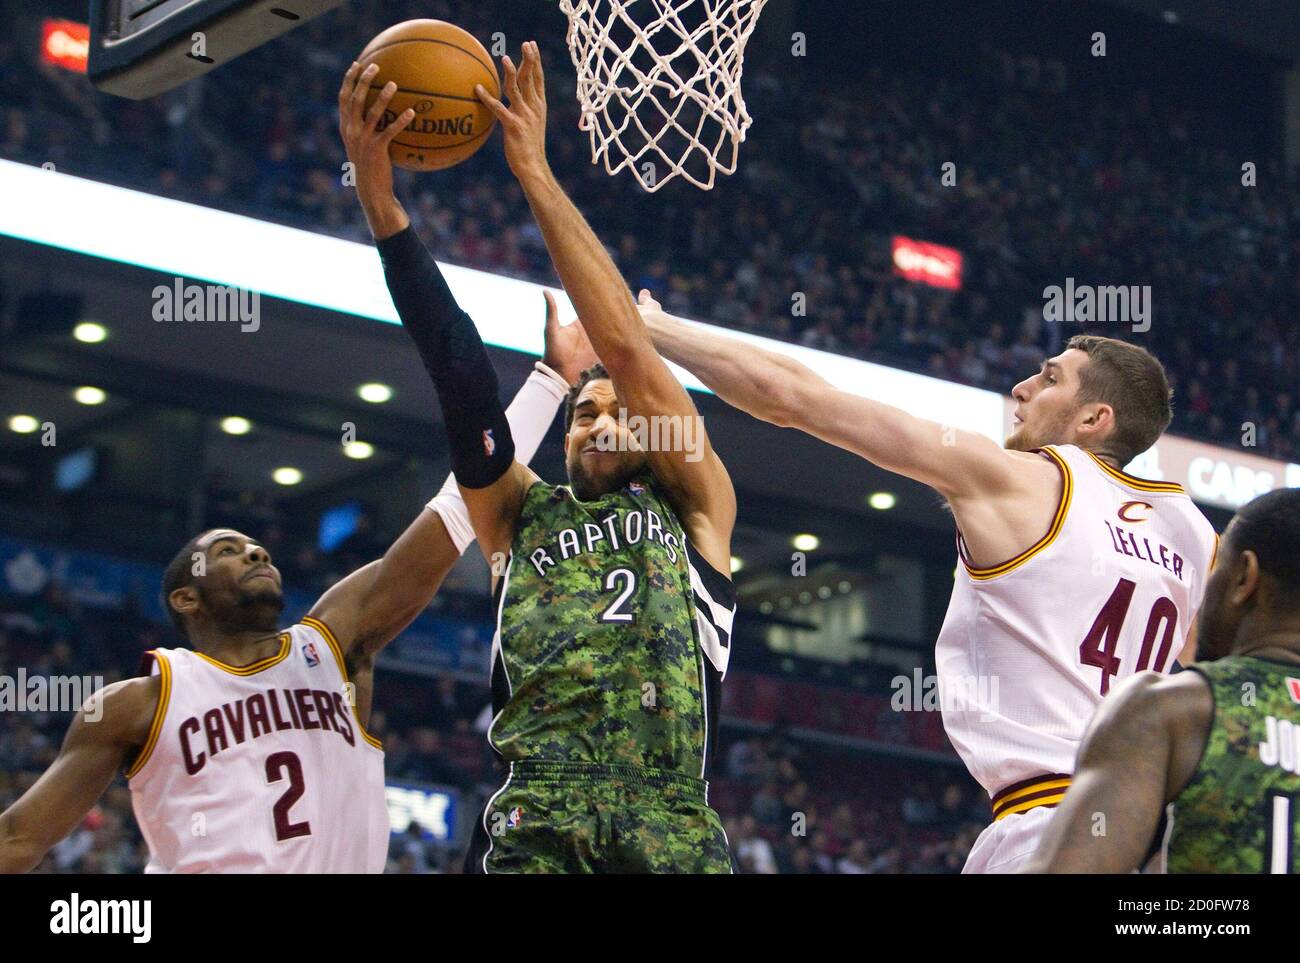 Toronto Raptors Landry Fields goes to the basket between Cleveland  Cavaliers Kyrie Irving (L) and Tyler Zeller in the first half of their NBA  basketball game in Toronto January 26, 2013. The